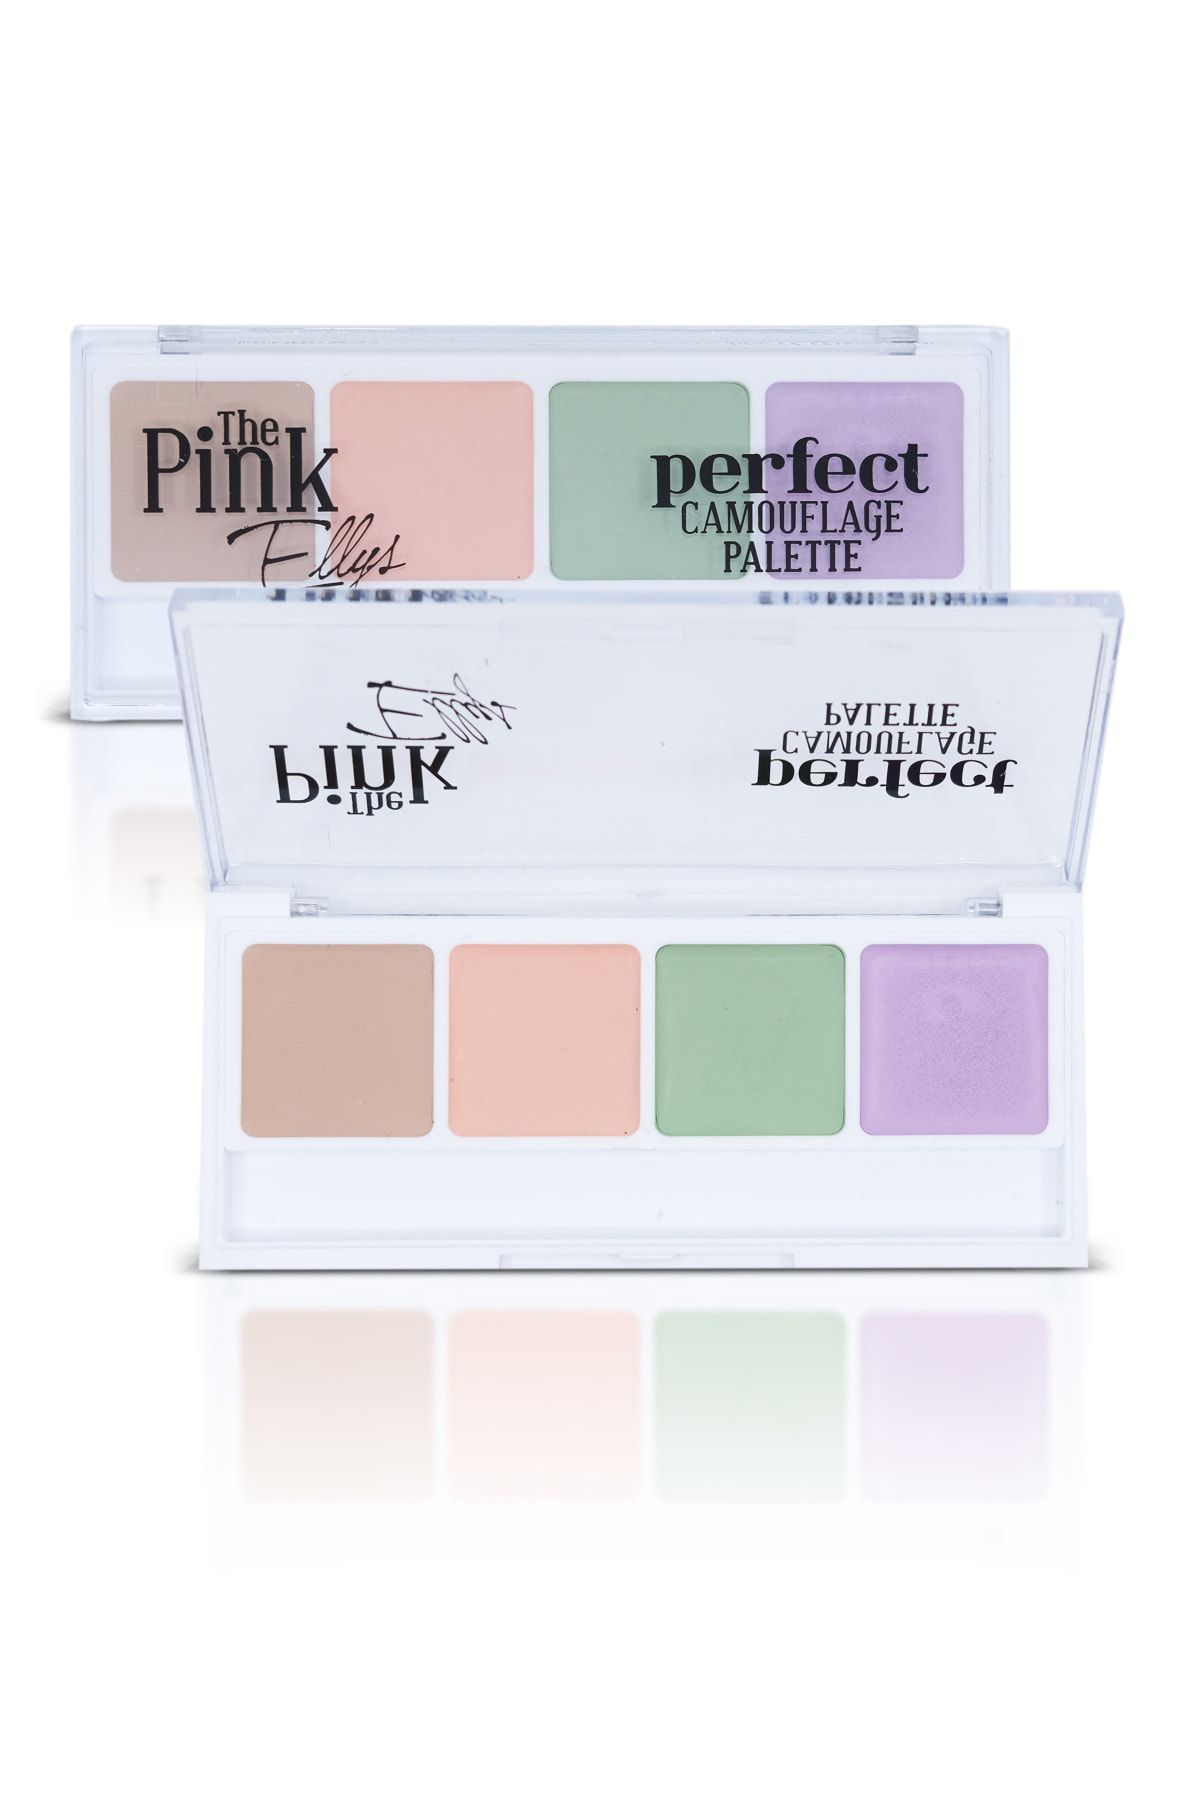 The Pink Ellys Perfect Camouflage Palette